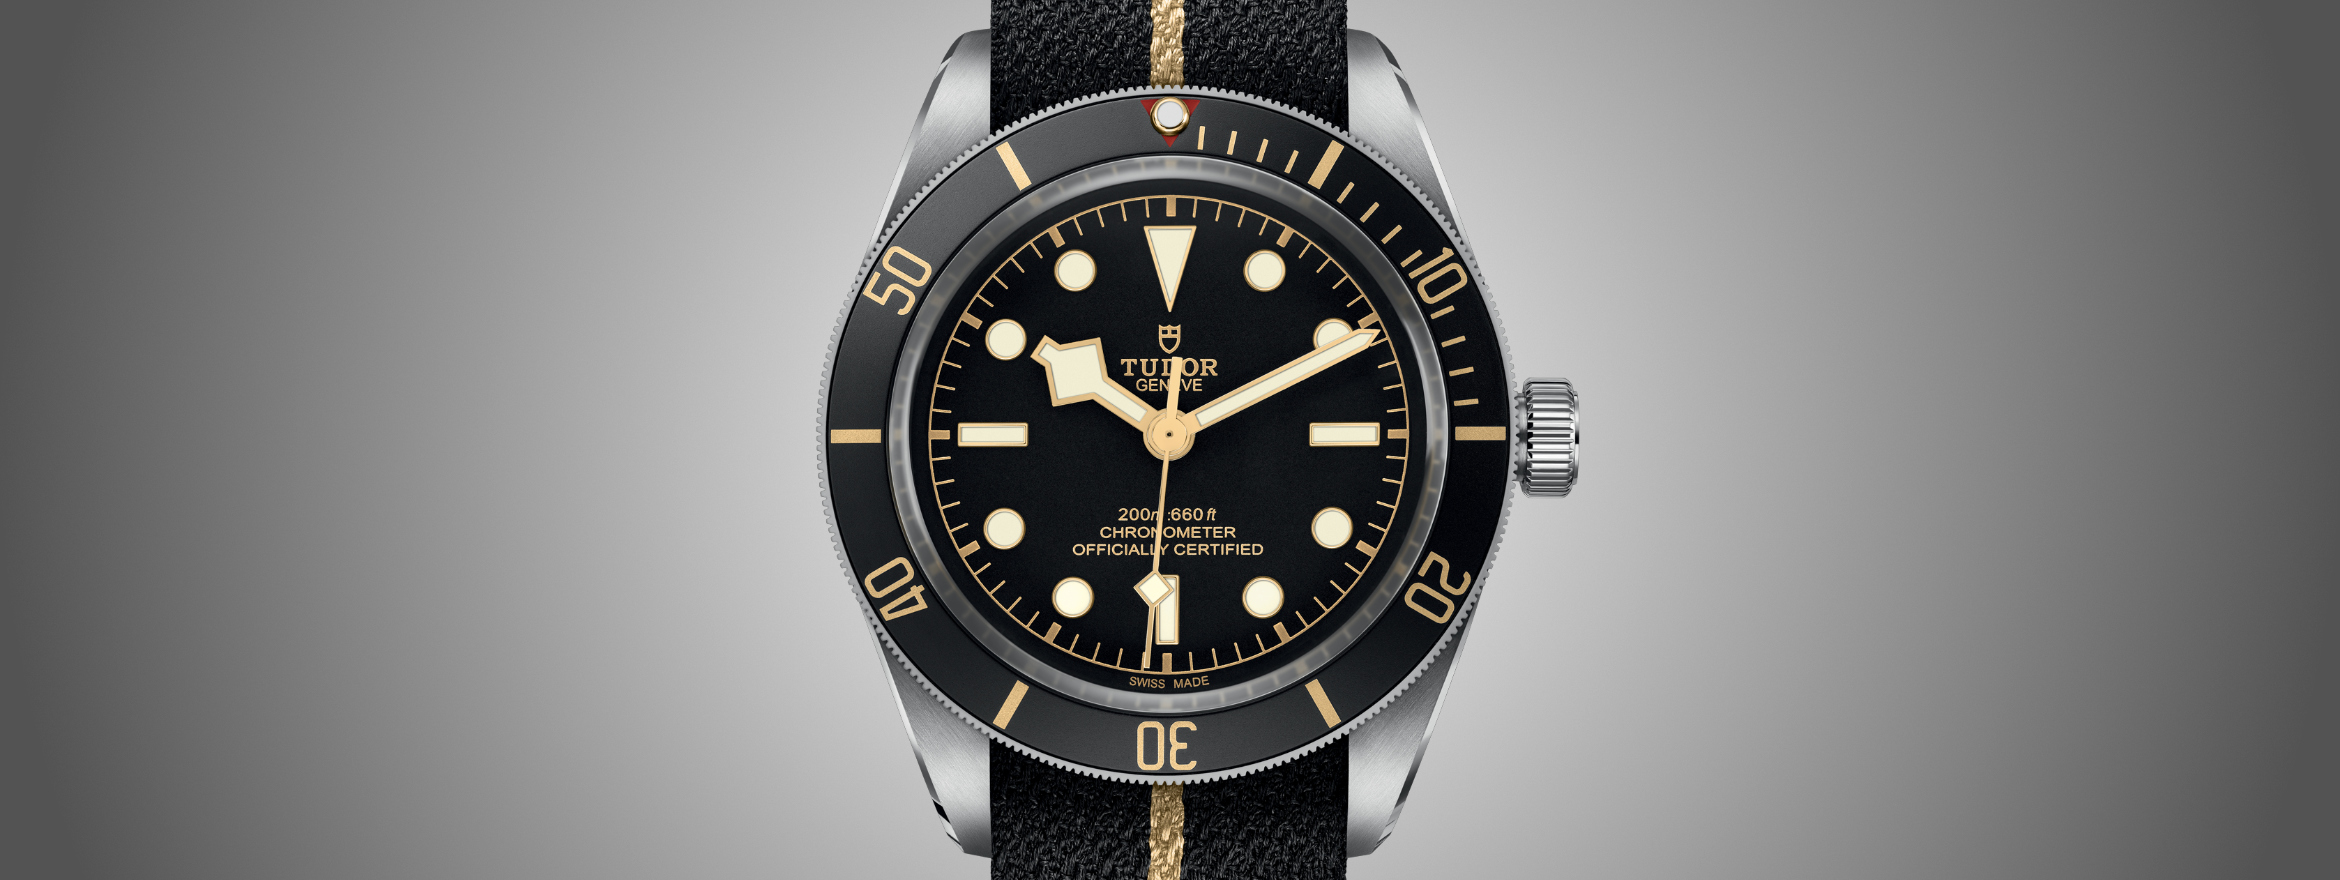 4 TUDOR WATCHES THAT MAKE A GOOD INVESTMENT-atpcosmetics.com.vn